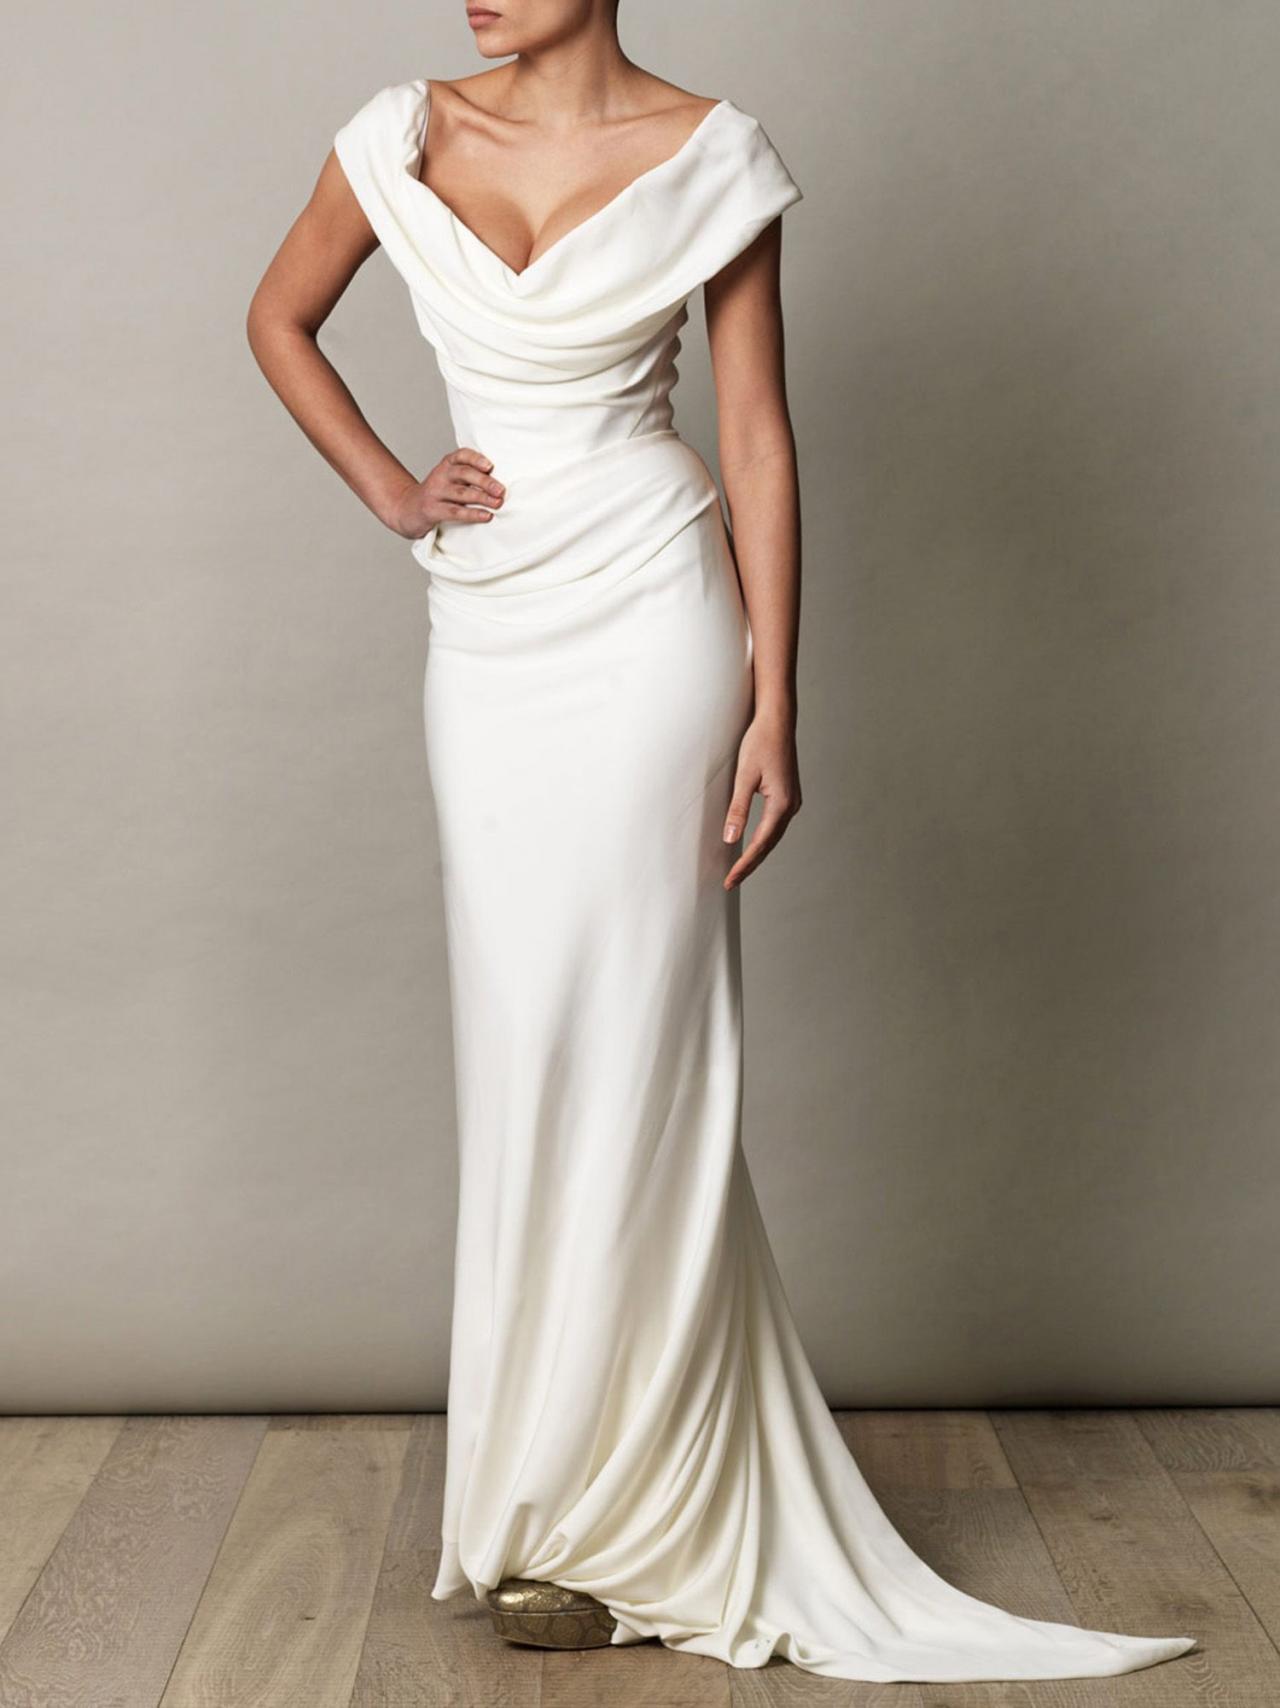 Off White Evening Dress Clearance Sale ...